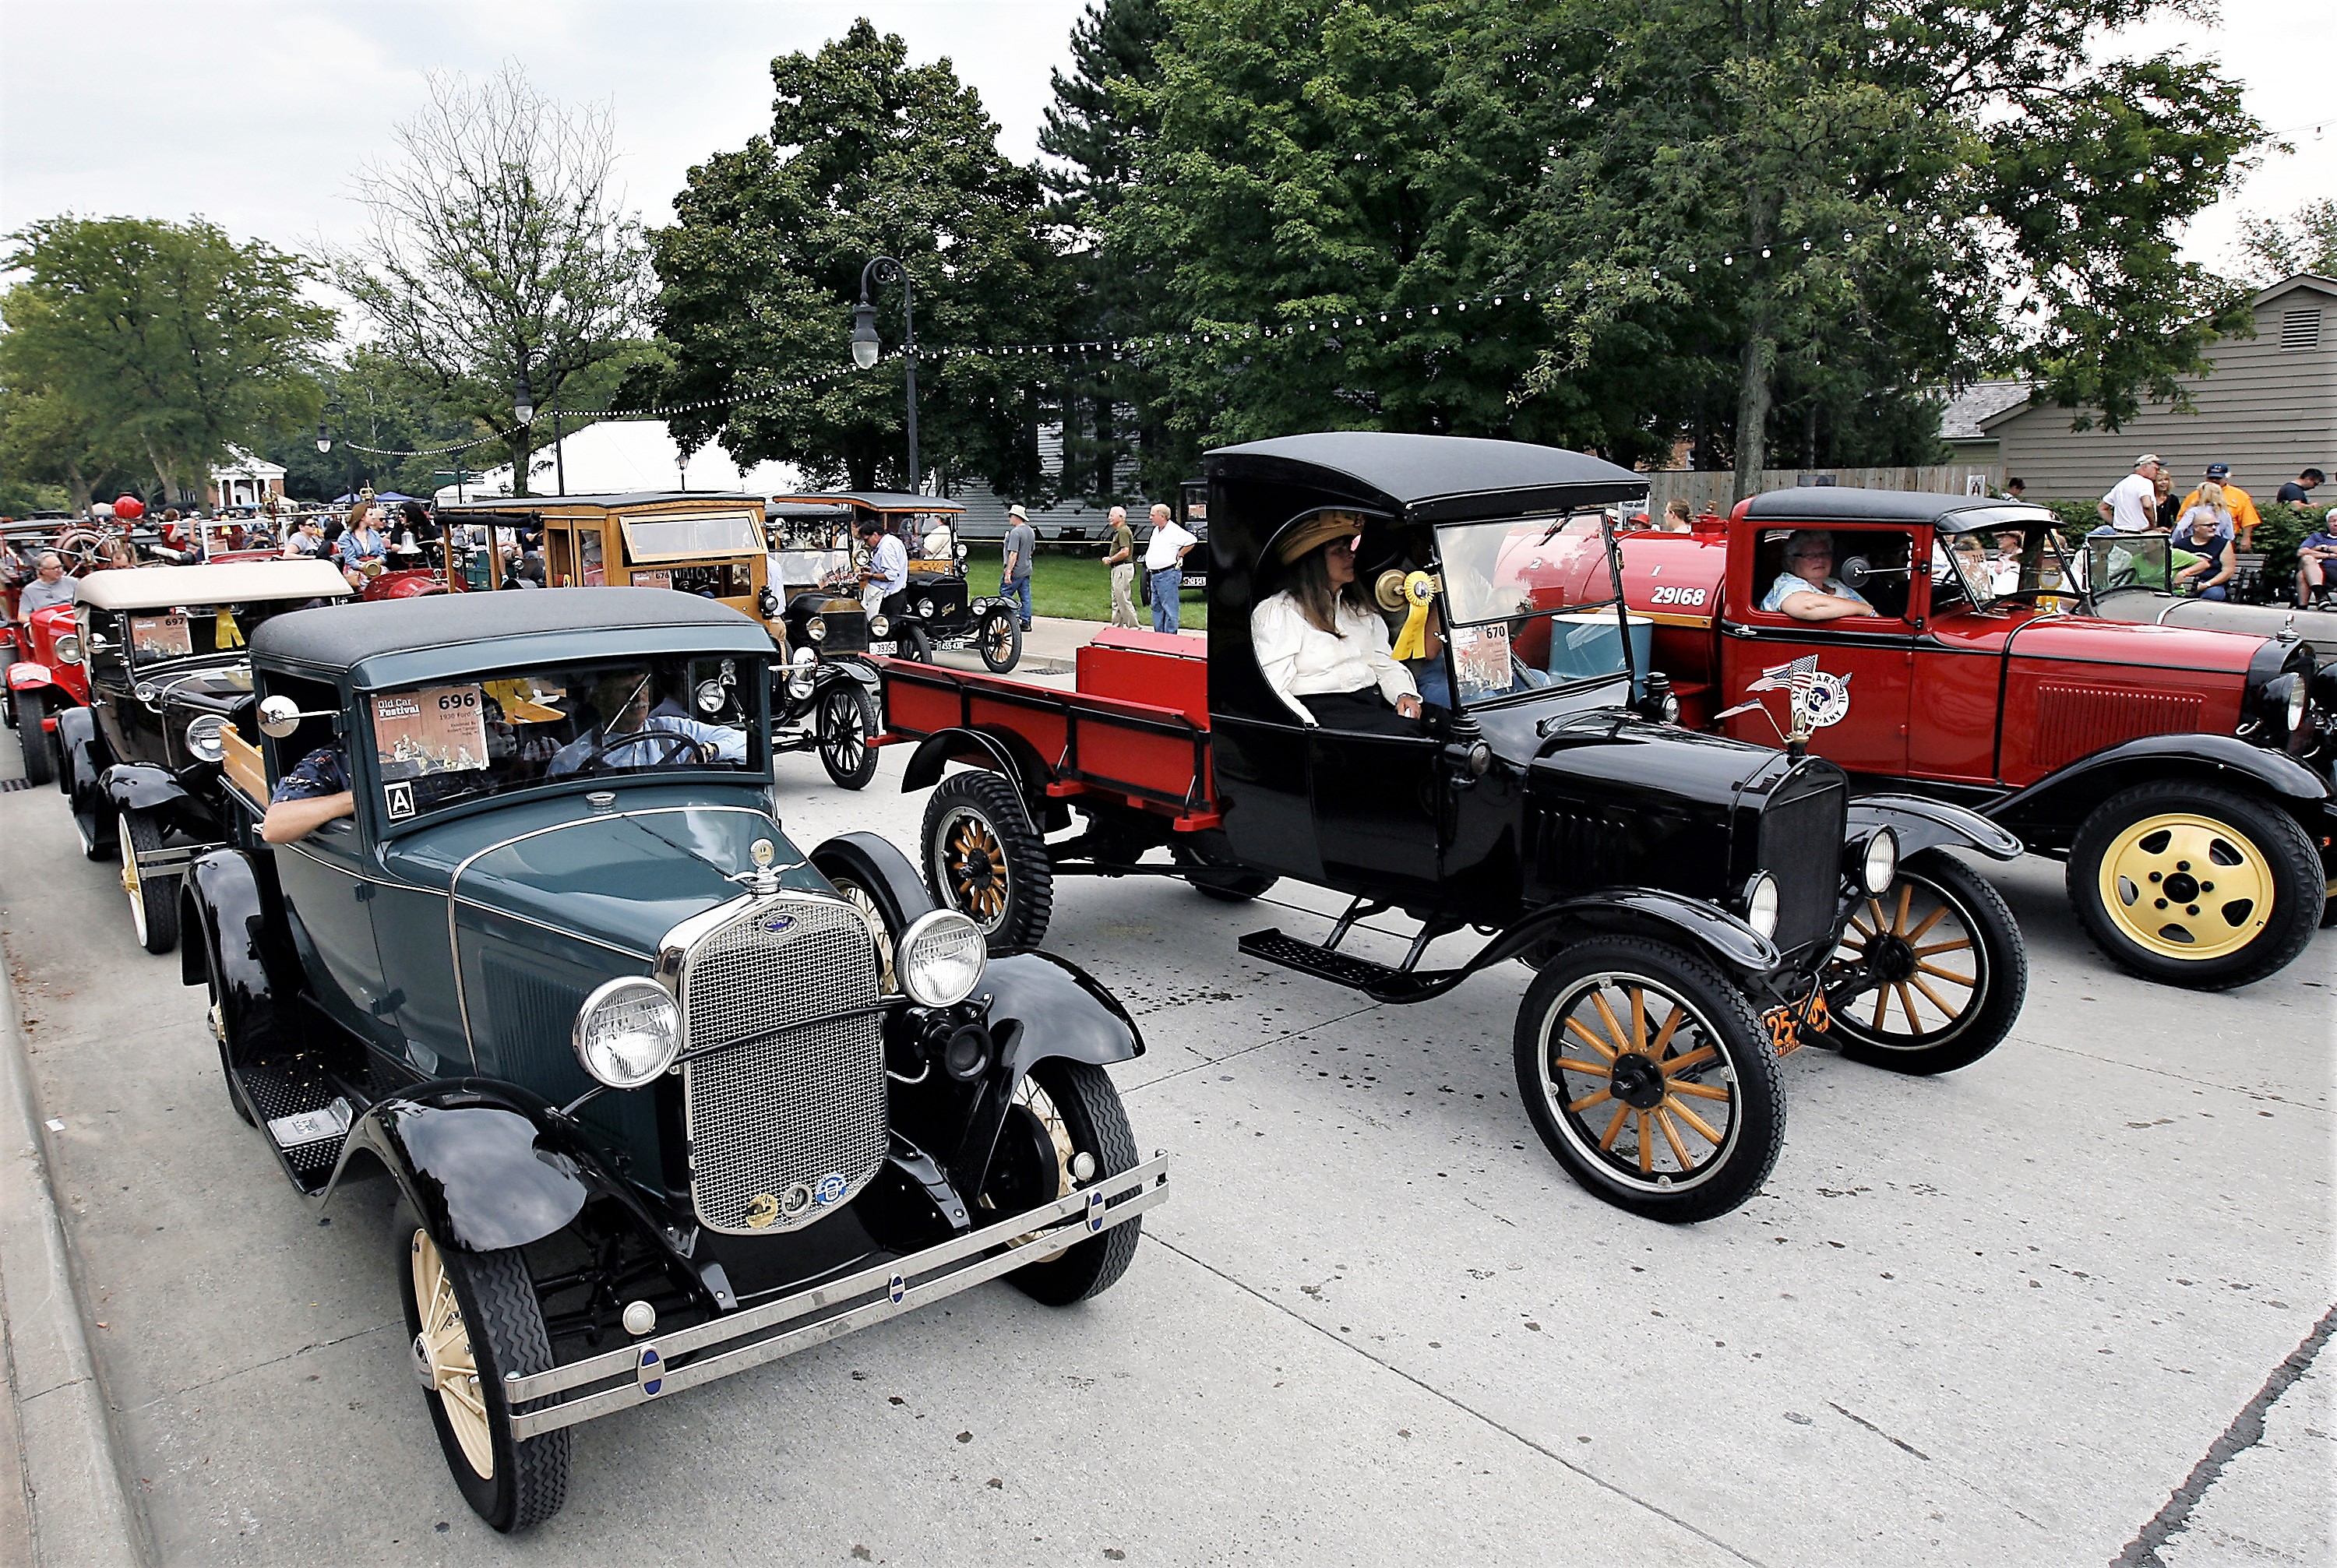 Old Car Festival, splendor in France, and new upcoming events ...